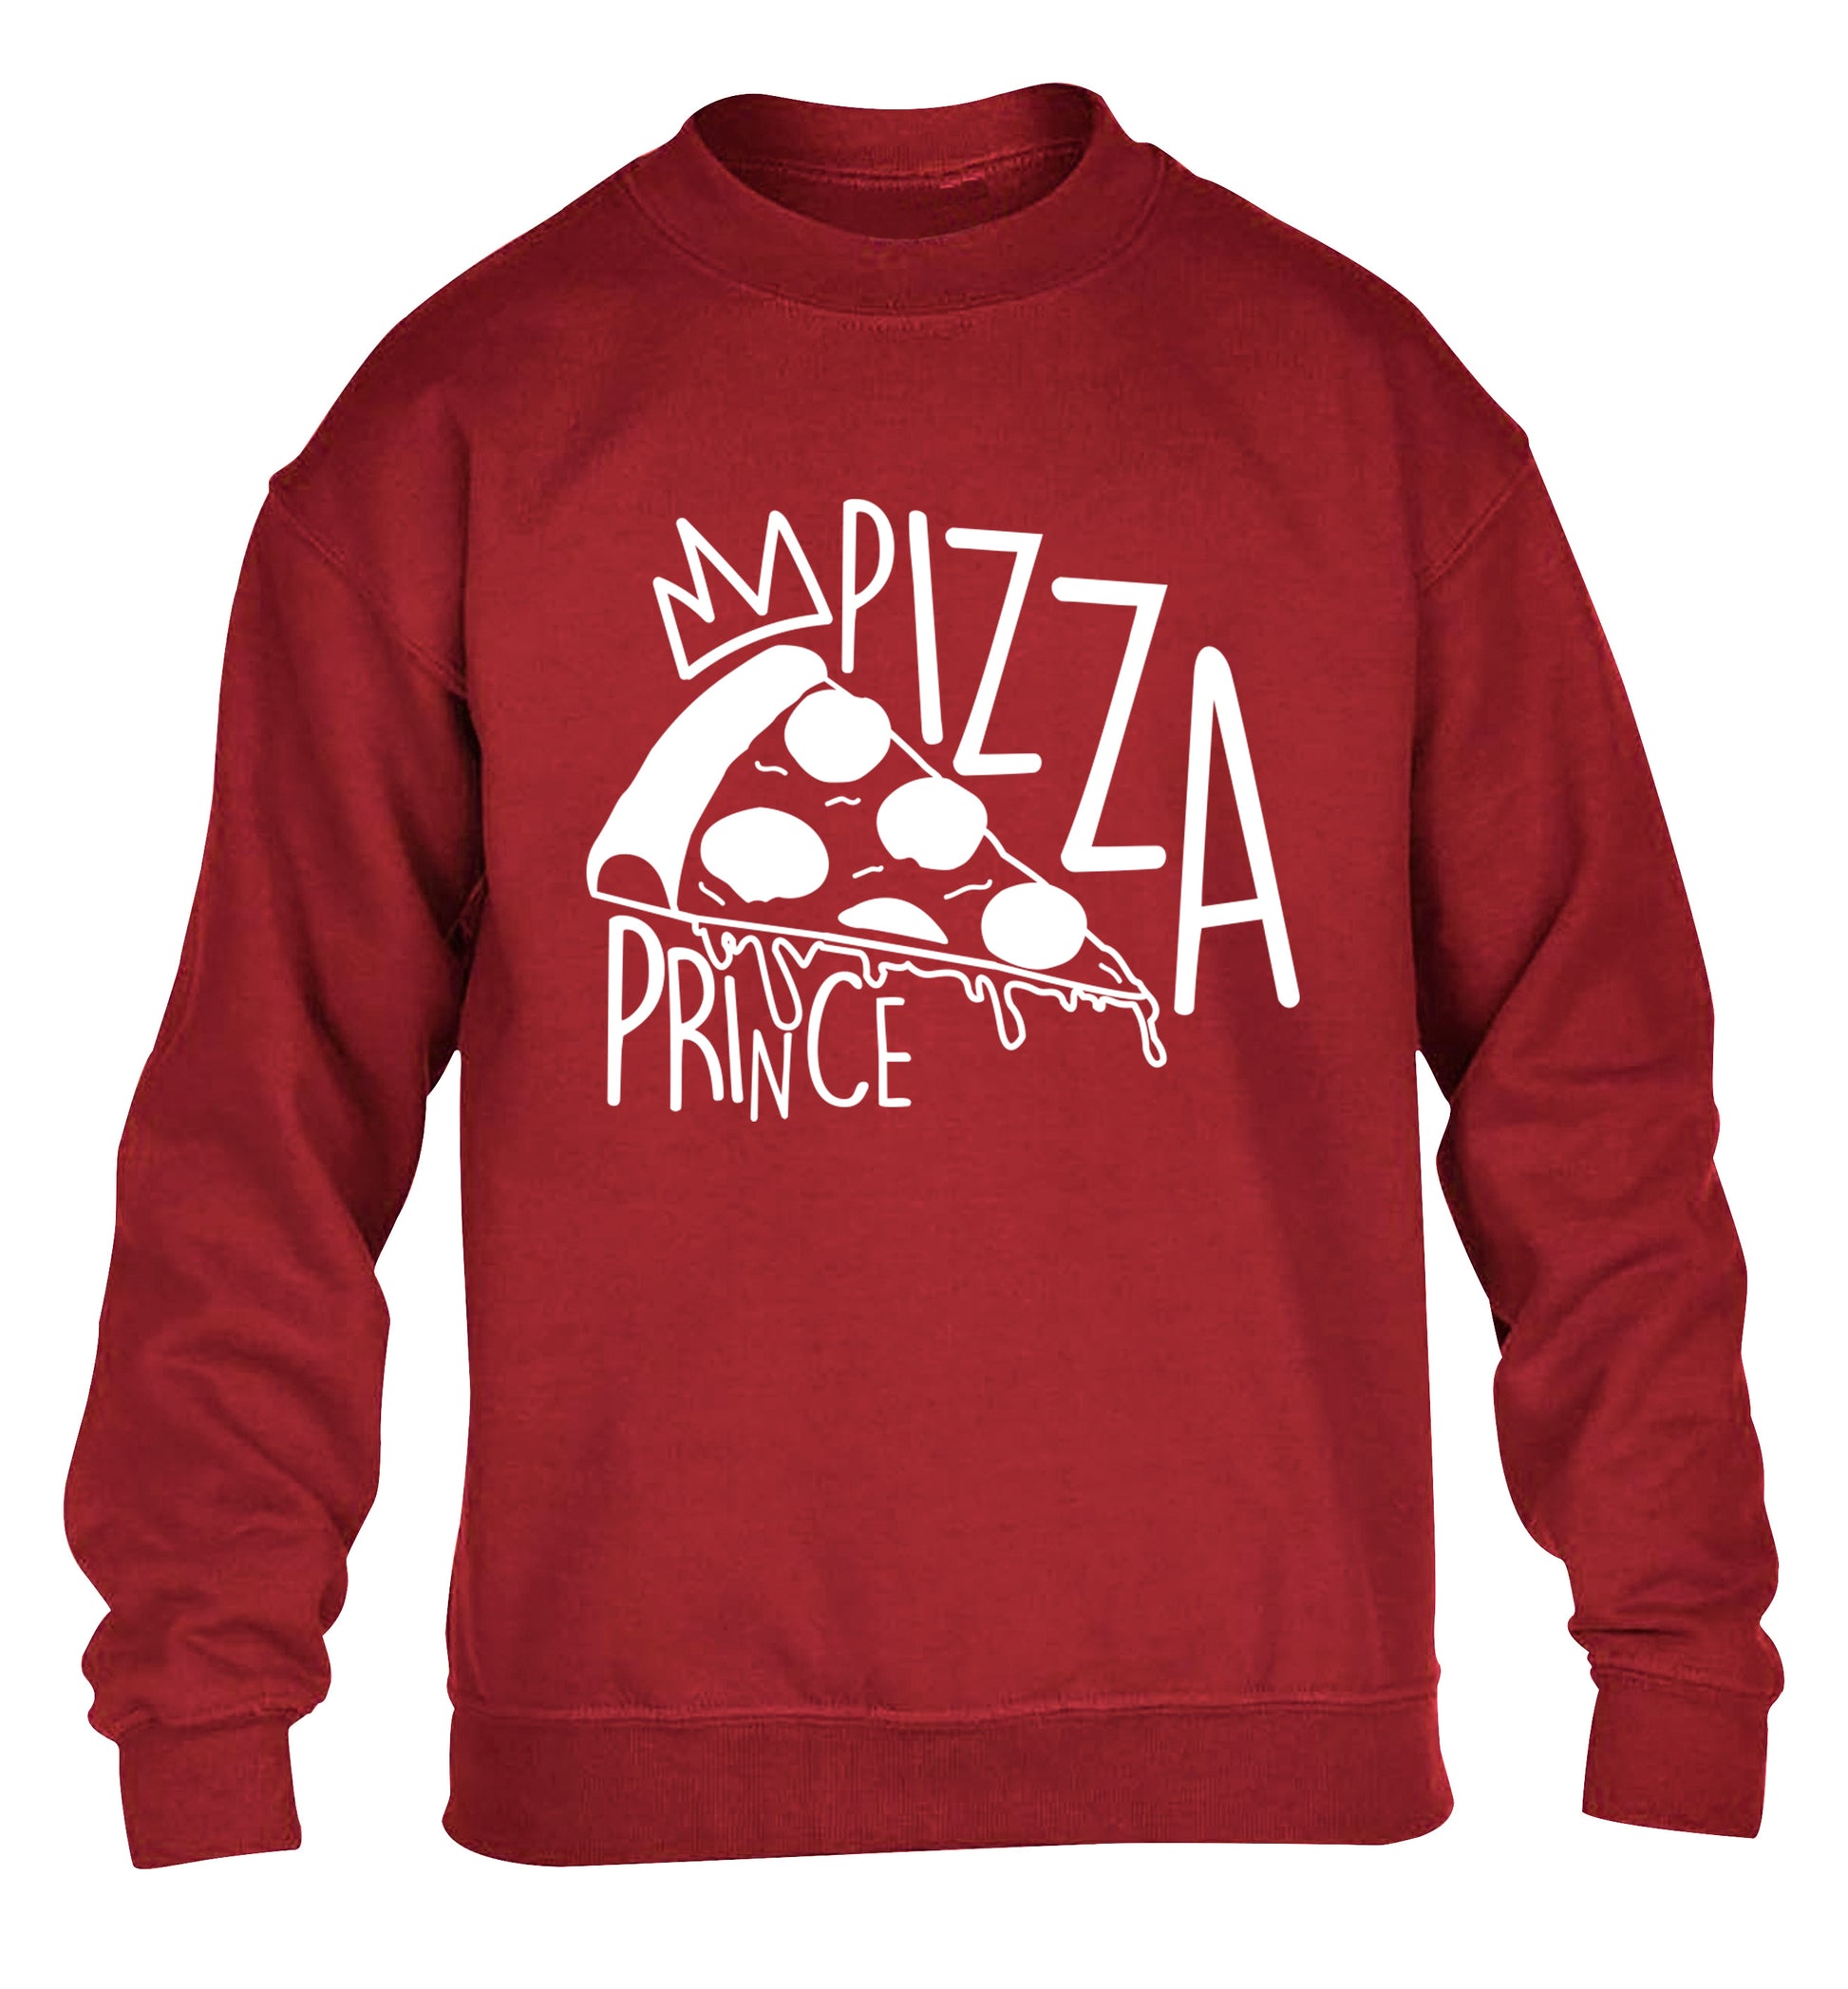 Pizza Prince children's grey sweater 12-13 Years